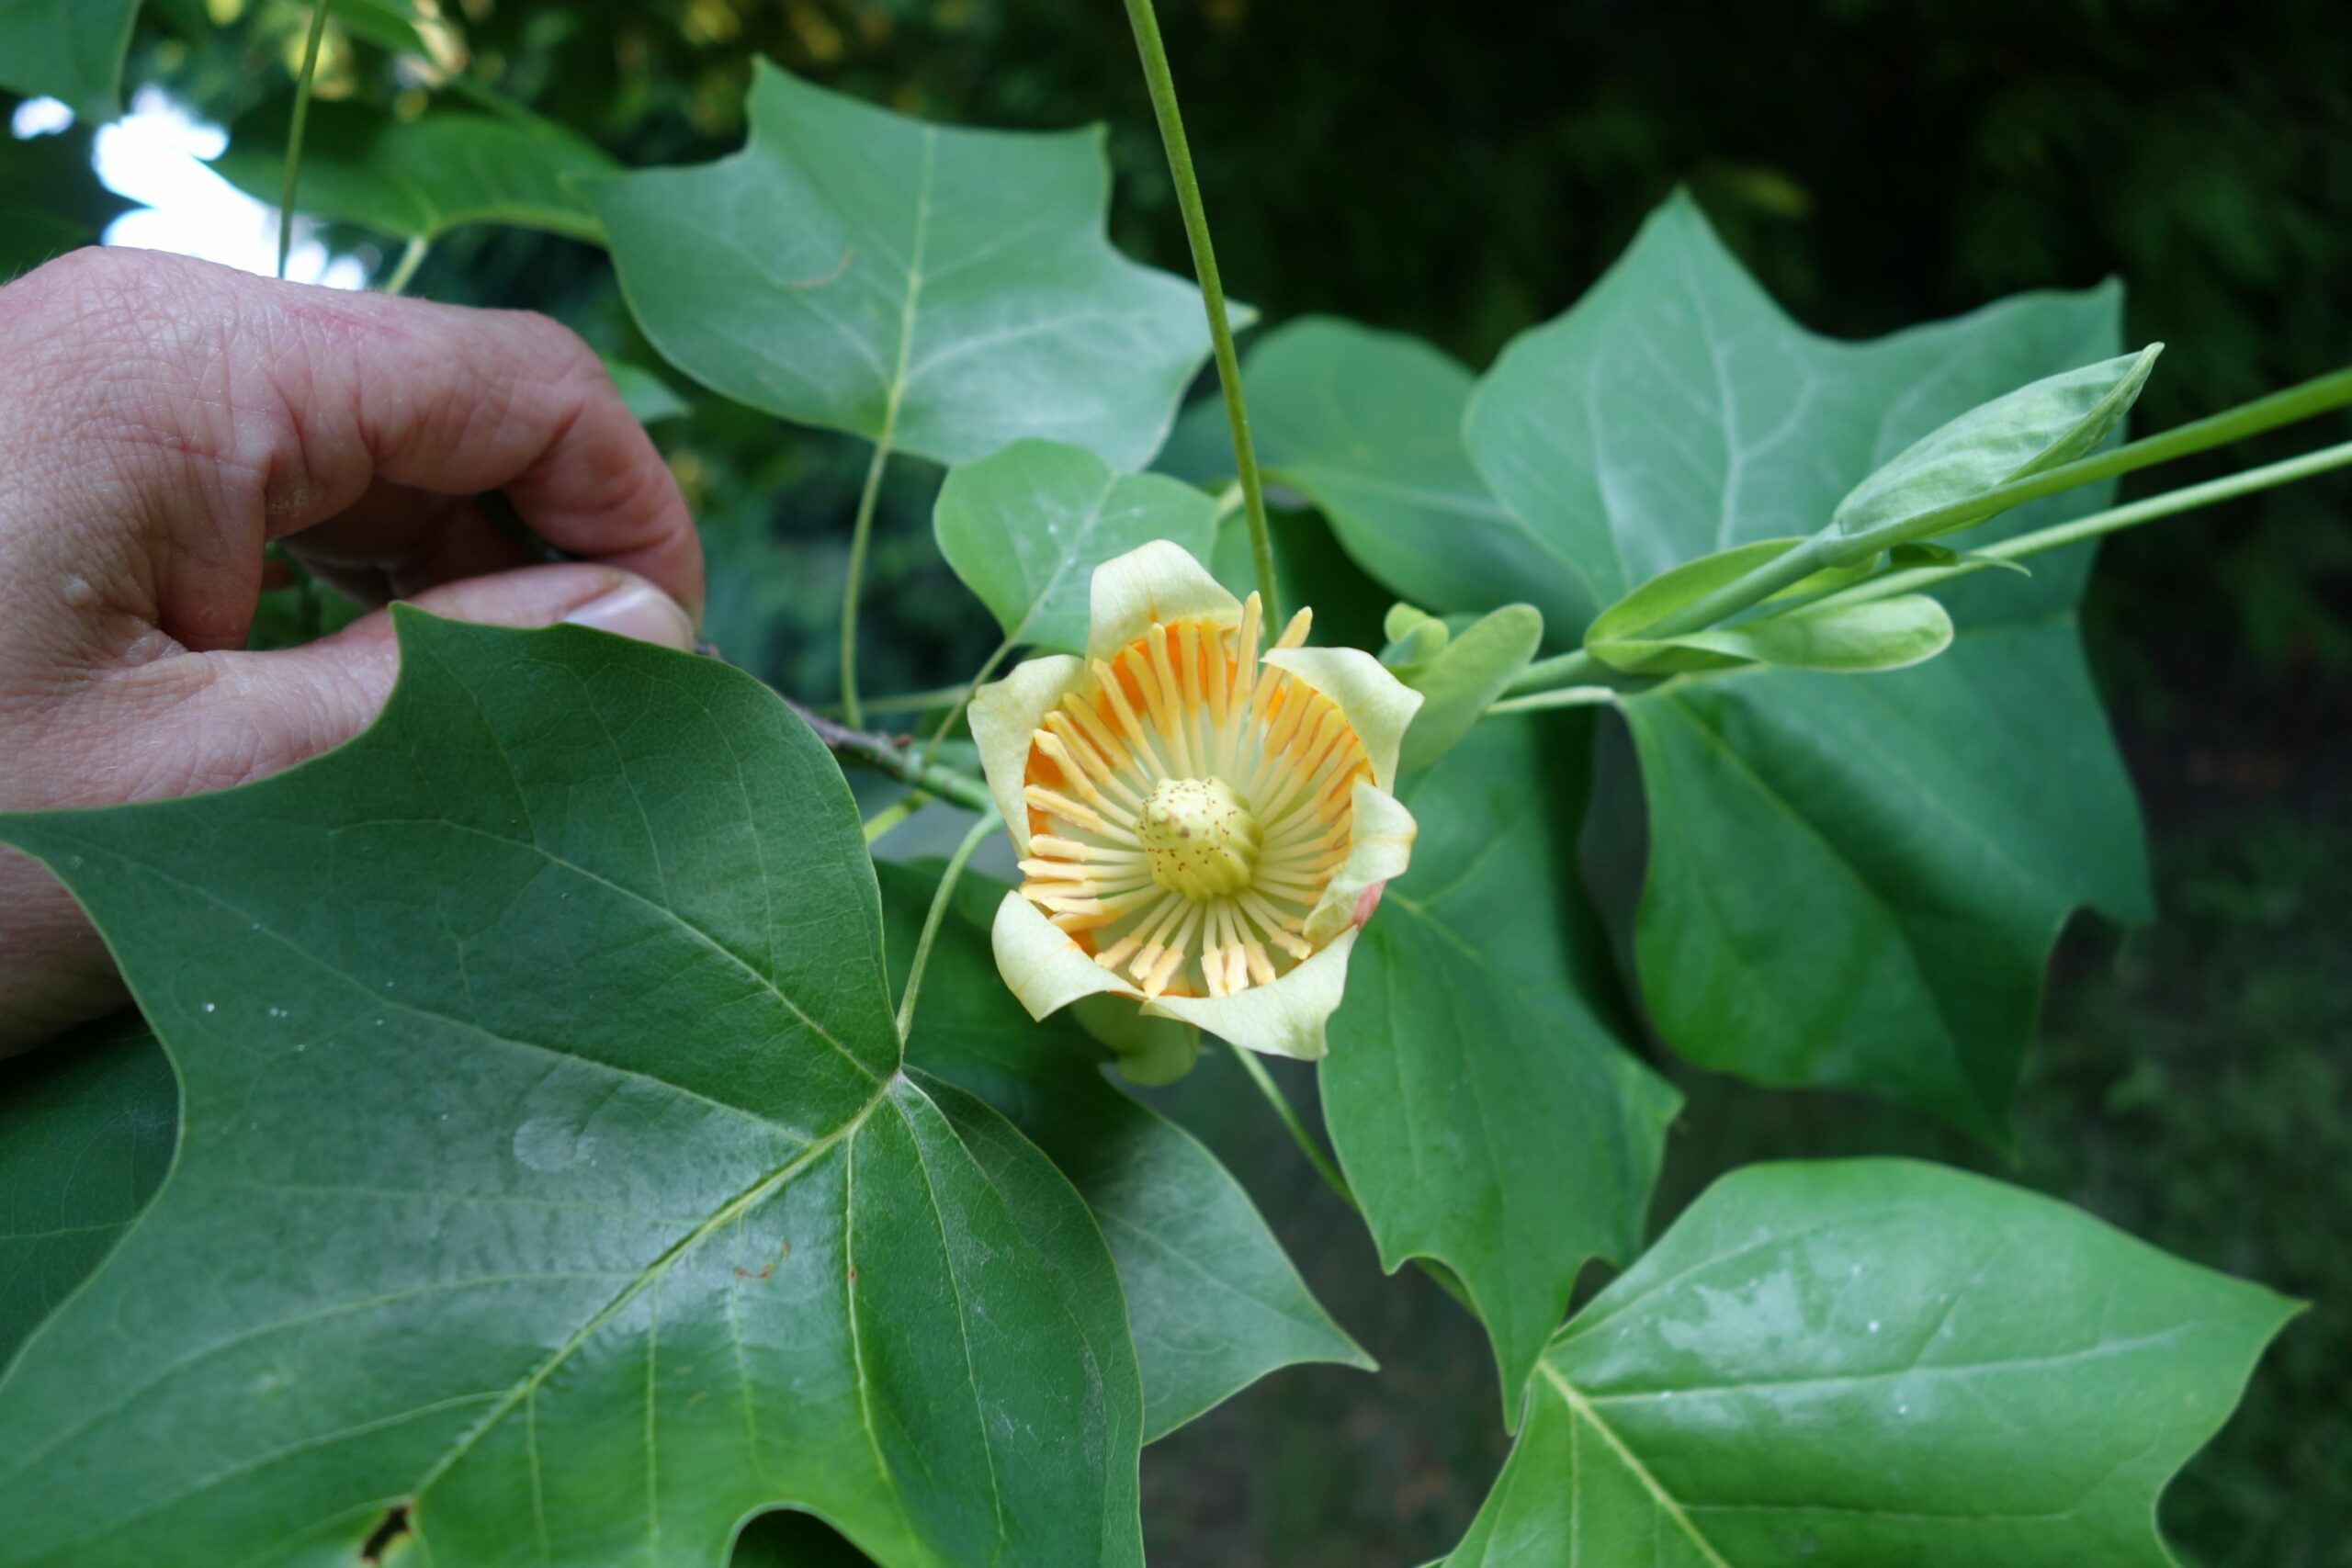 Liriodendron tulipfera yellow flower and green leaves. Credit Kevin Hobbs